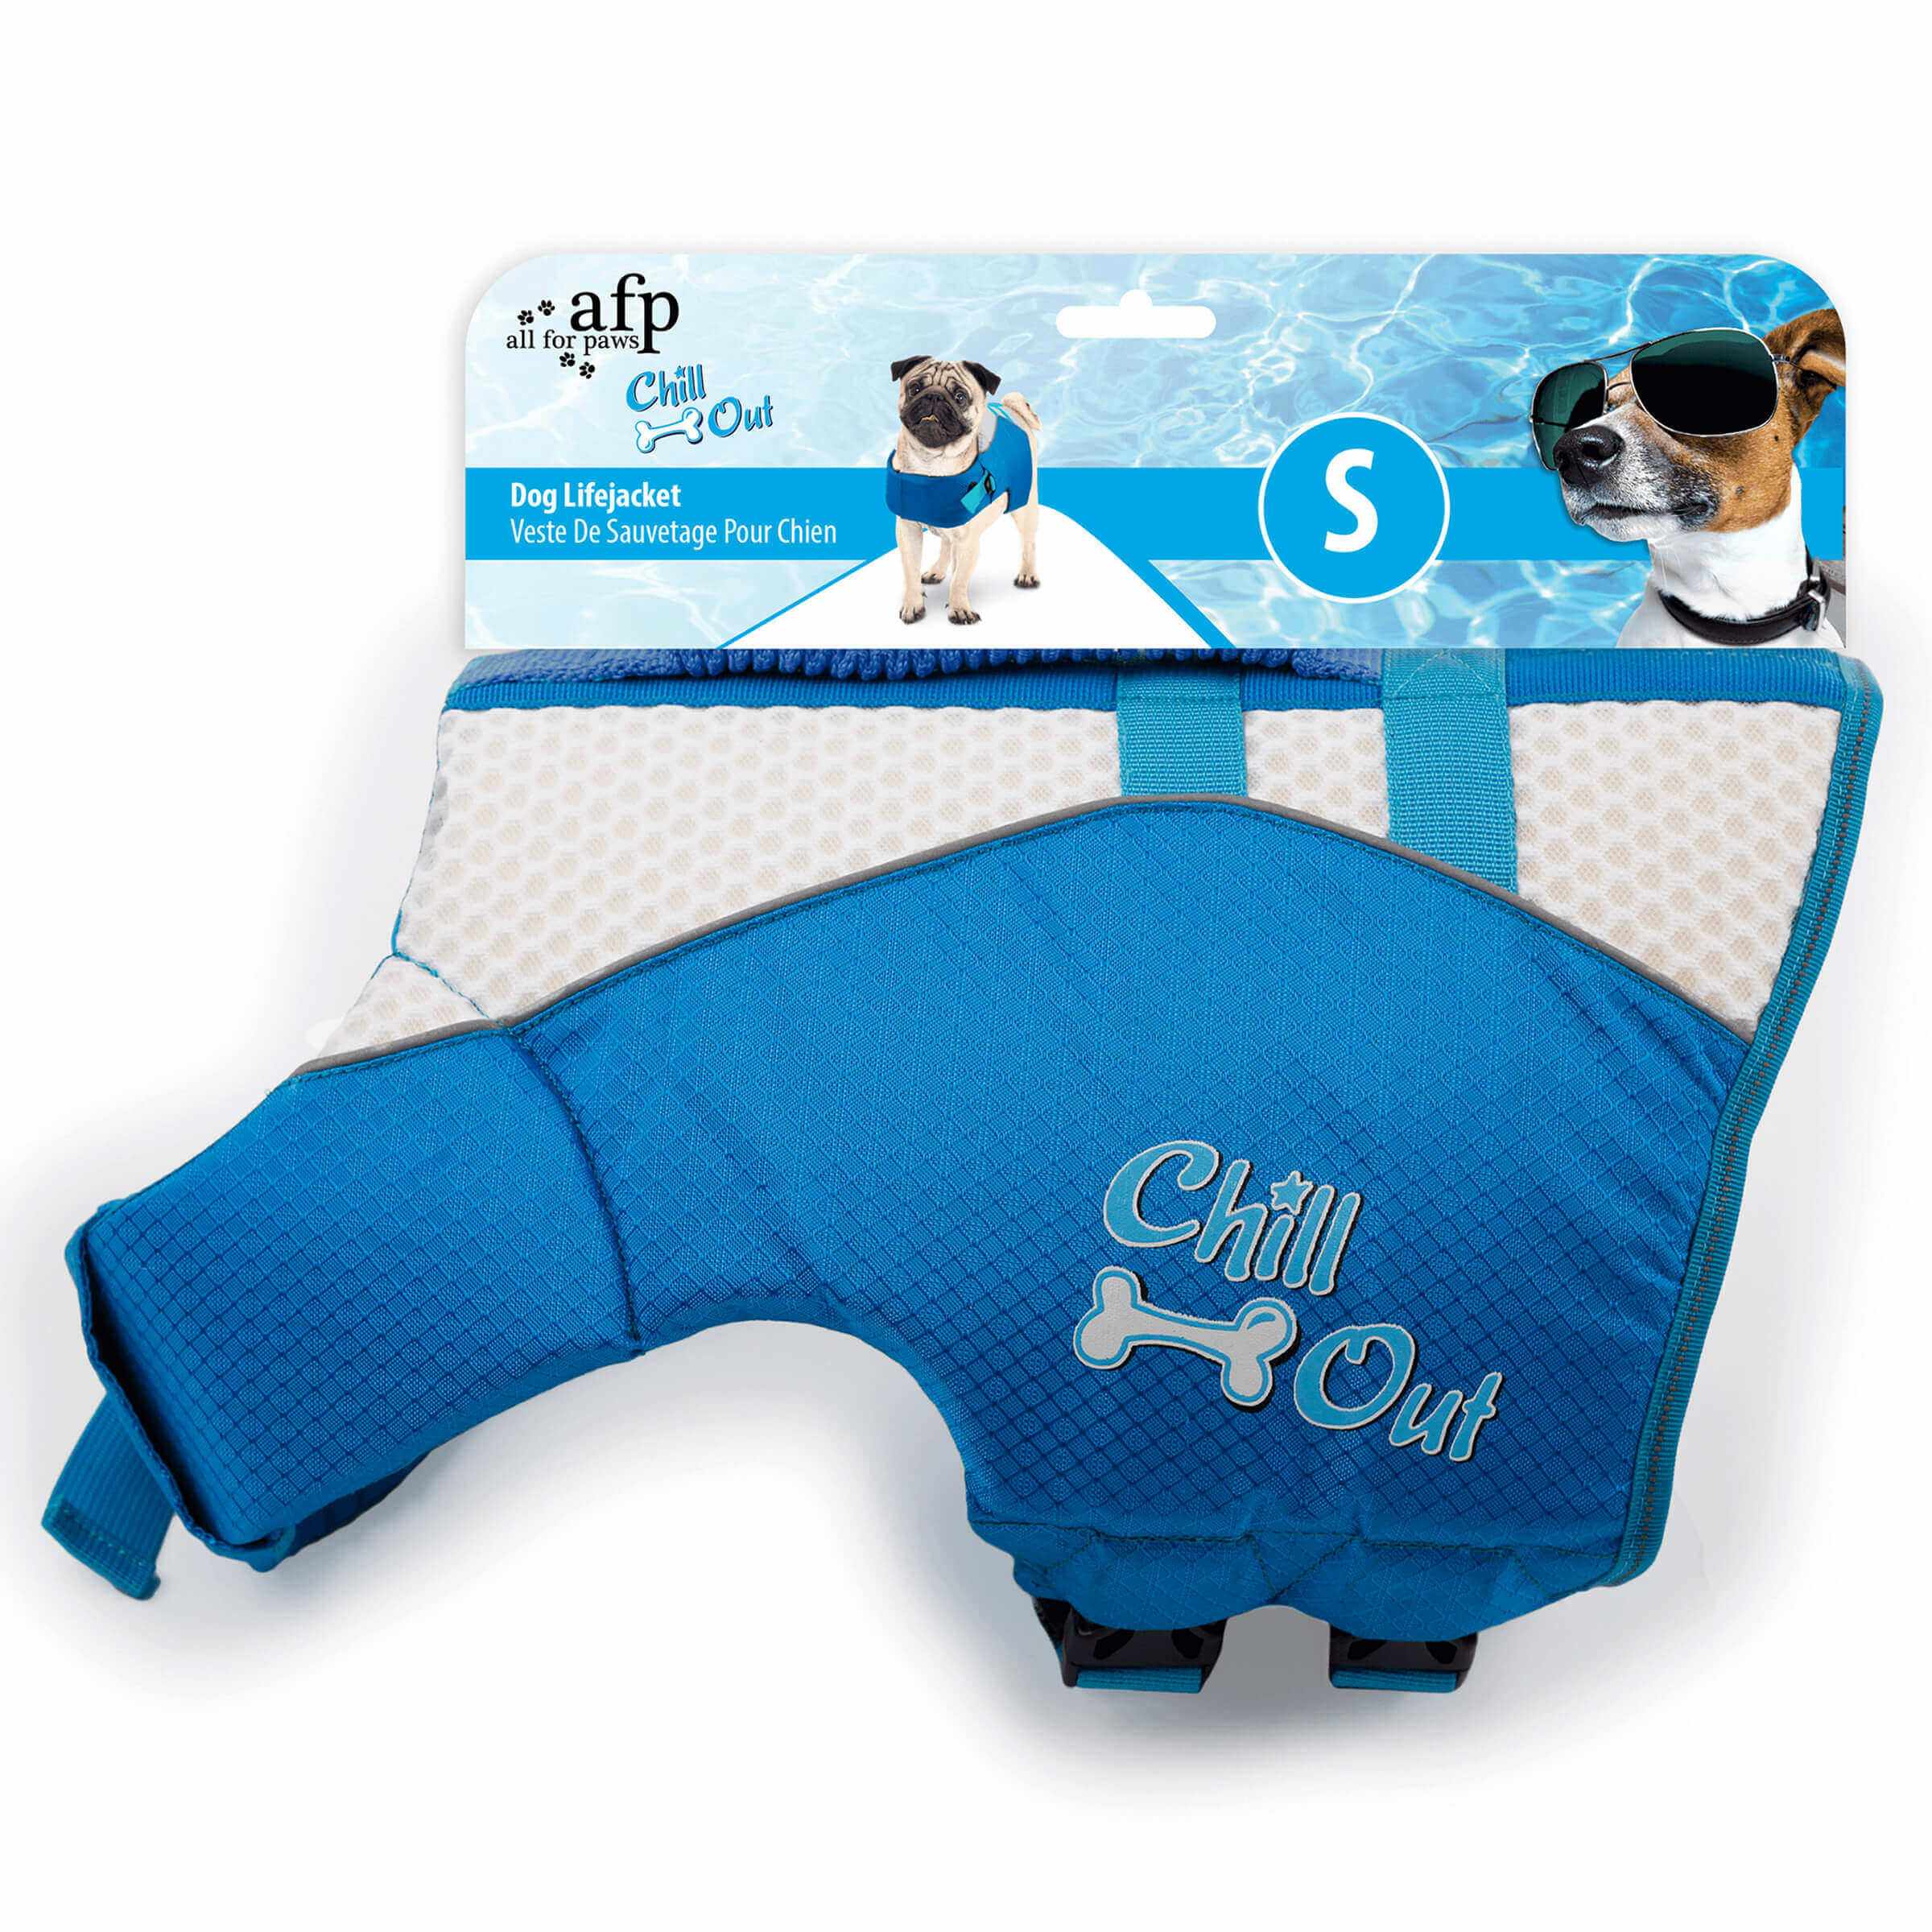 All for Paws AFP Chill Out Schwimmweste Hund mit Griff L 39-45kg